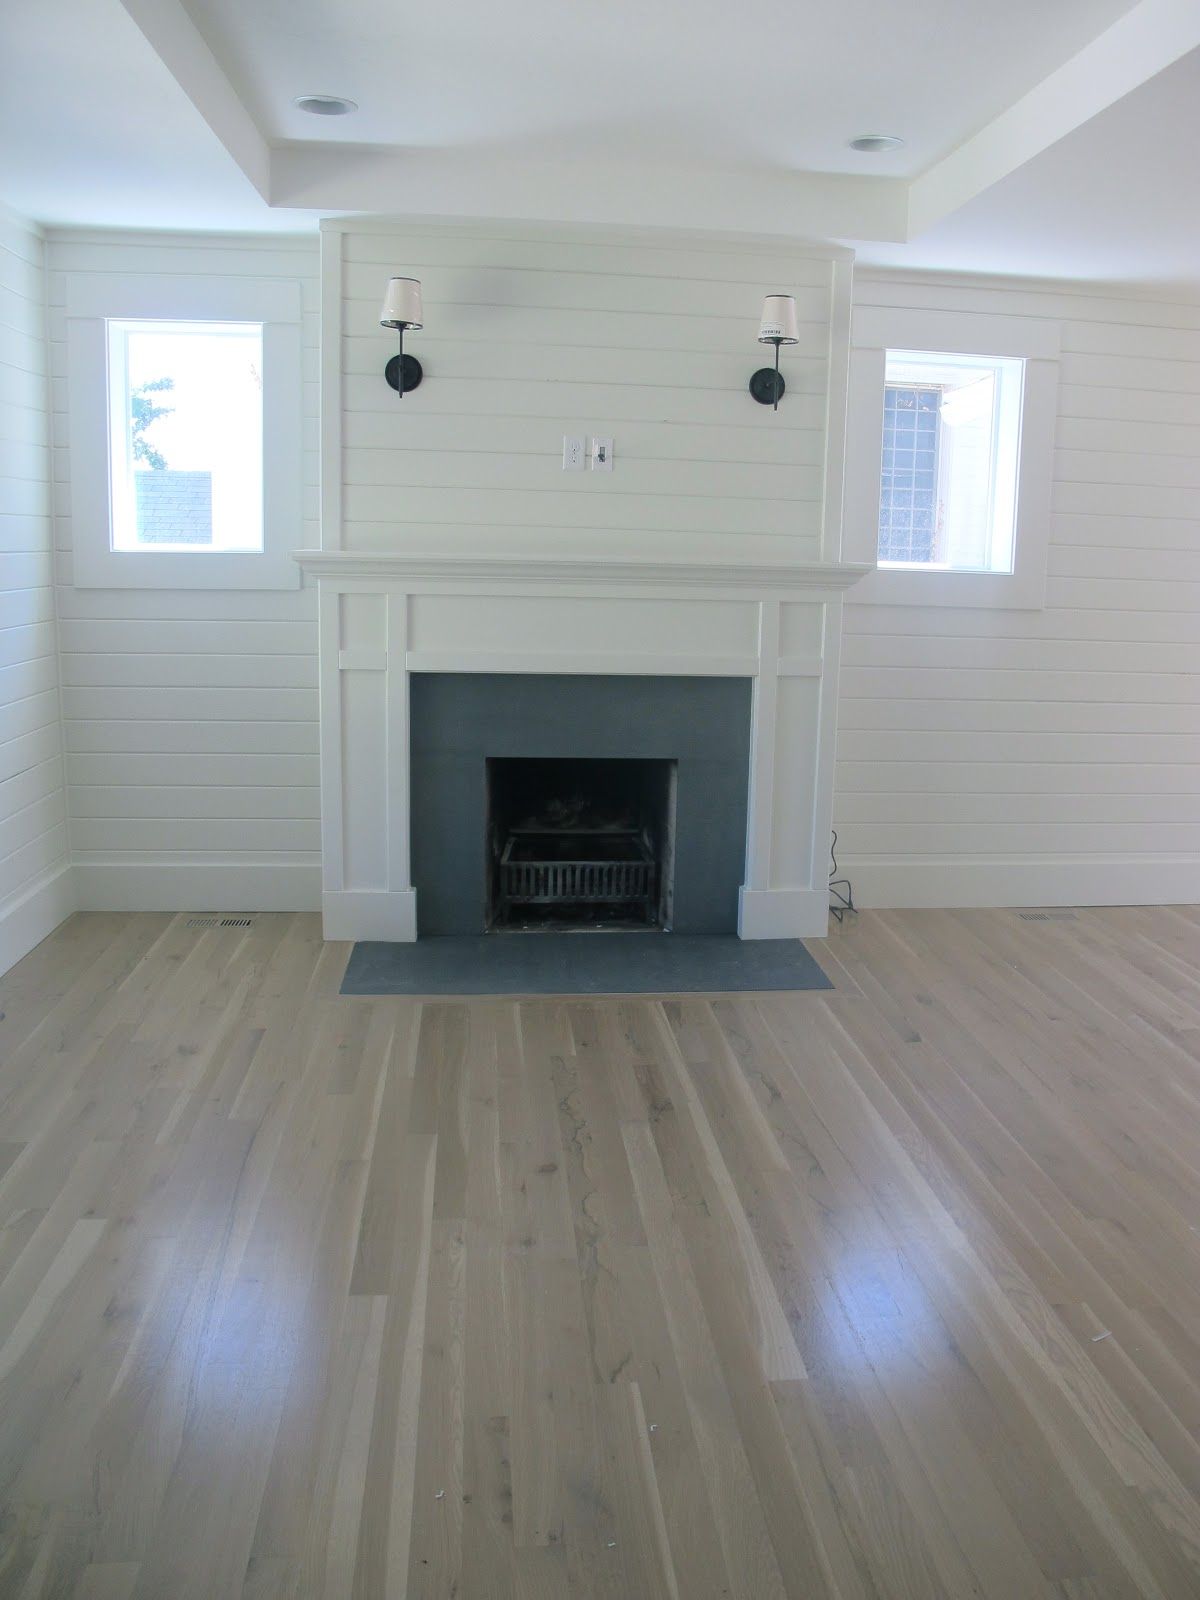 Gas Fireplace Paint Awesome Fireplace Mantle and Plank Wall